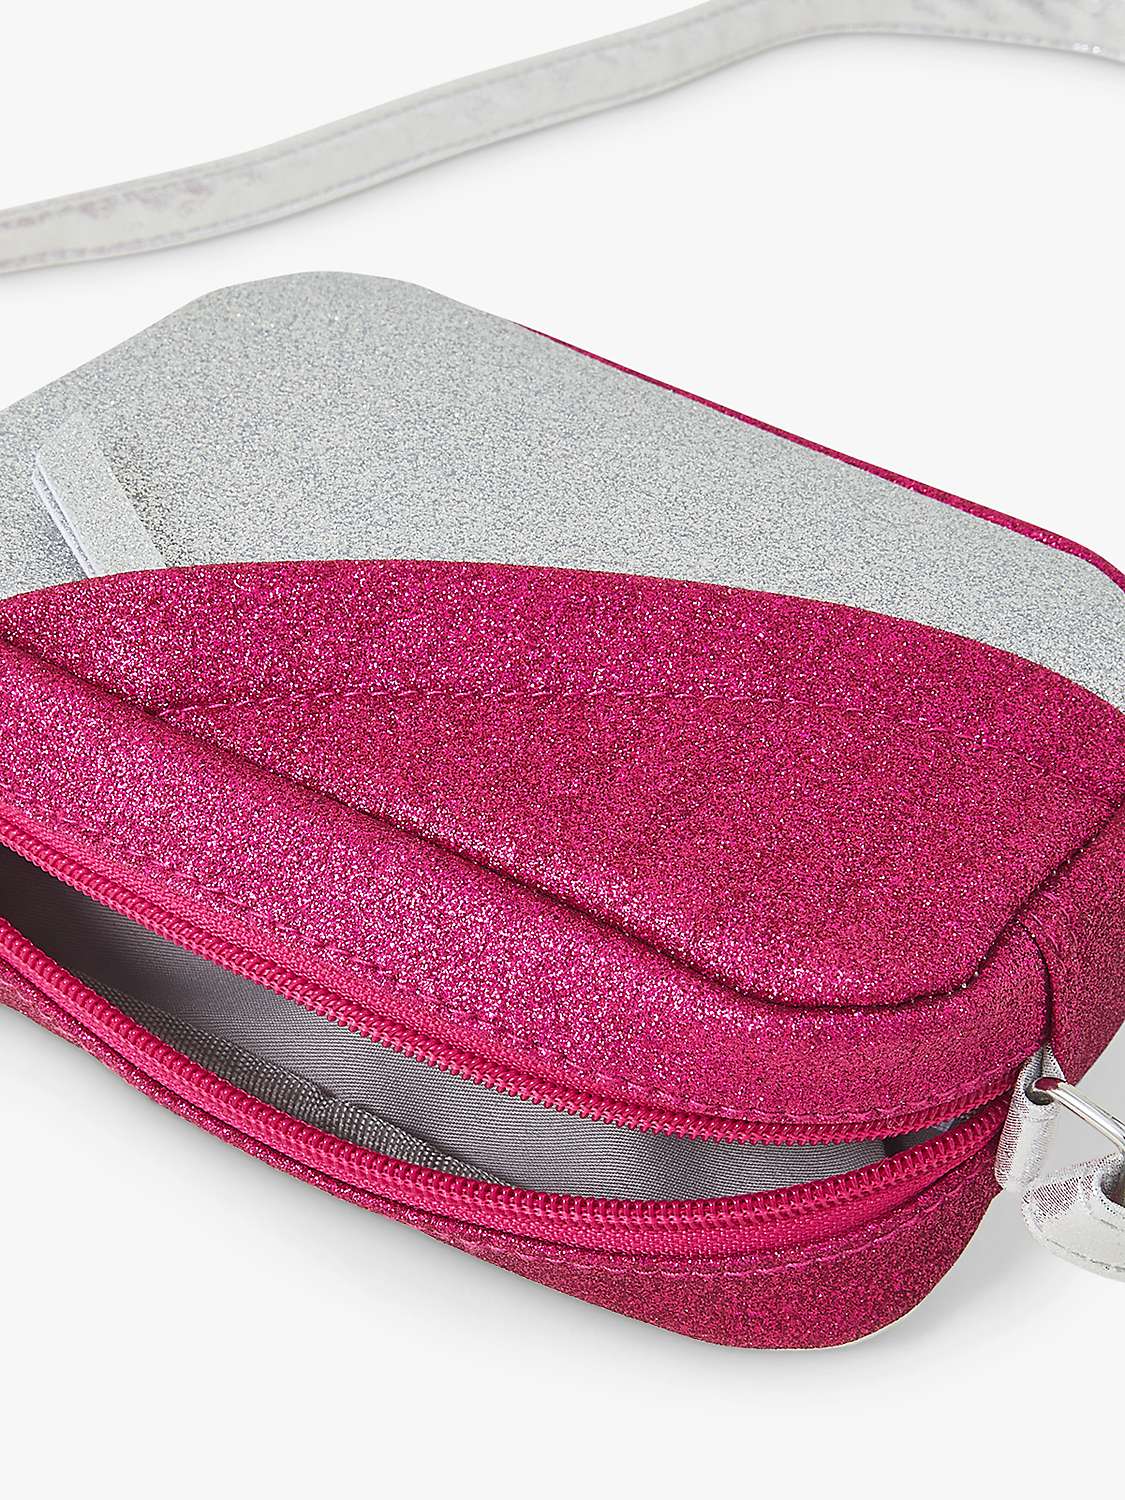 Buy Angels by Accessorize Kids' Glitter Panel Cross Body Bag, Silver Online at johnlewis.com